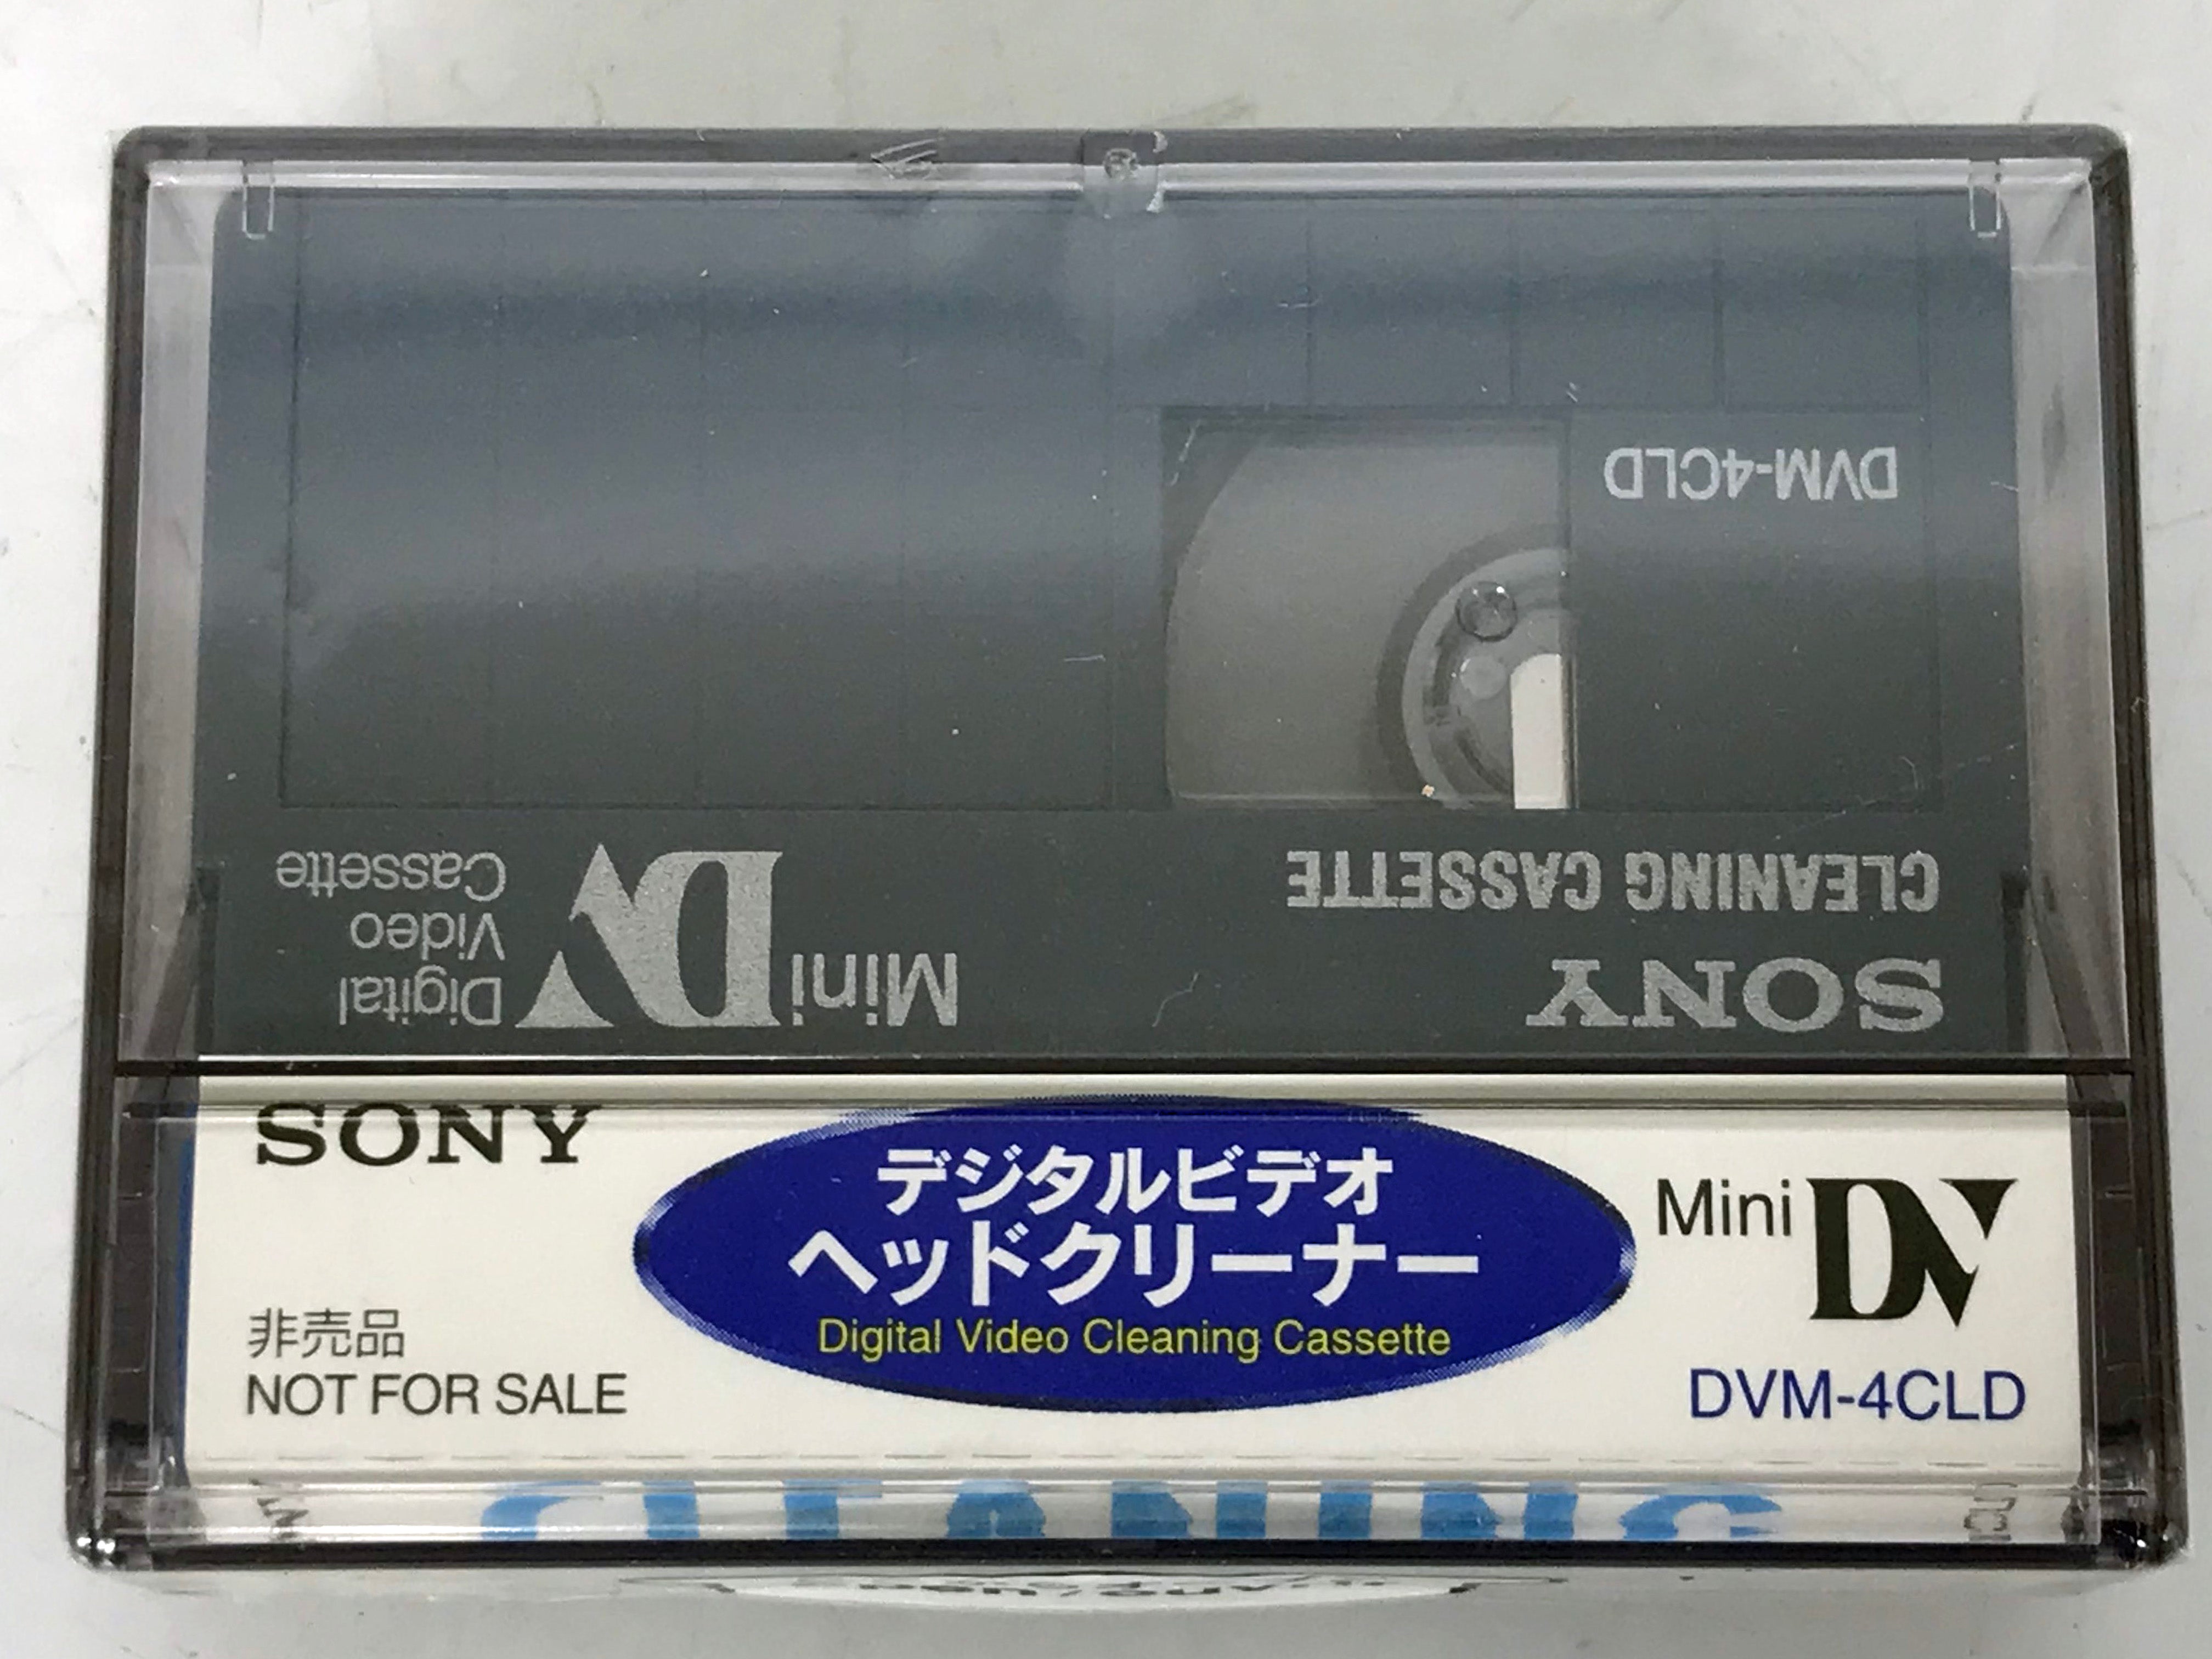 Sony DVM-4CLD Digital Video Cleaning Cassette